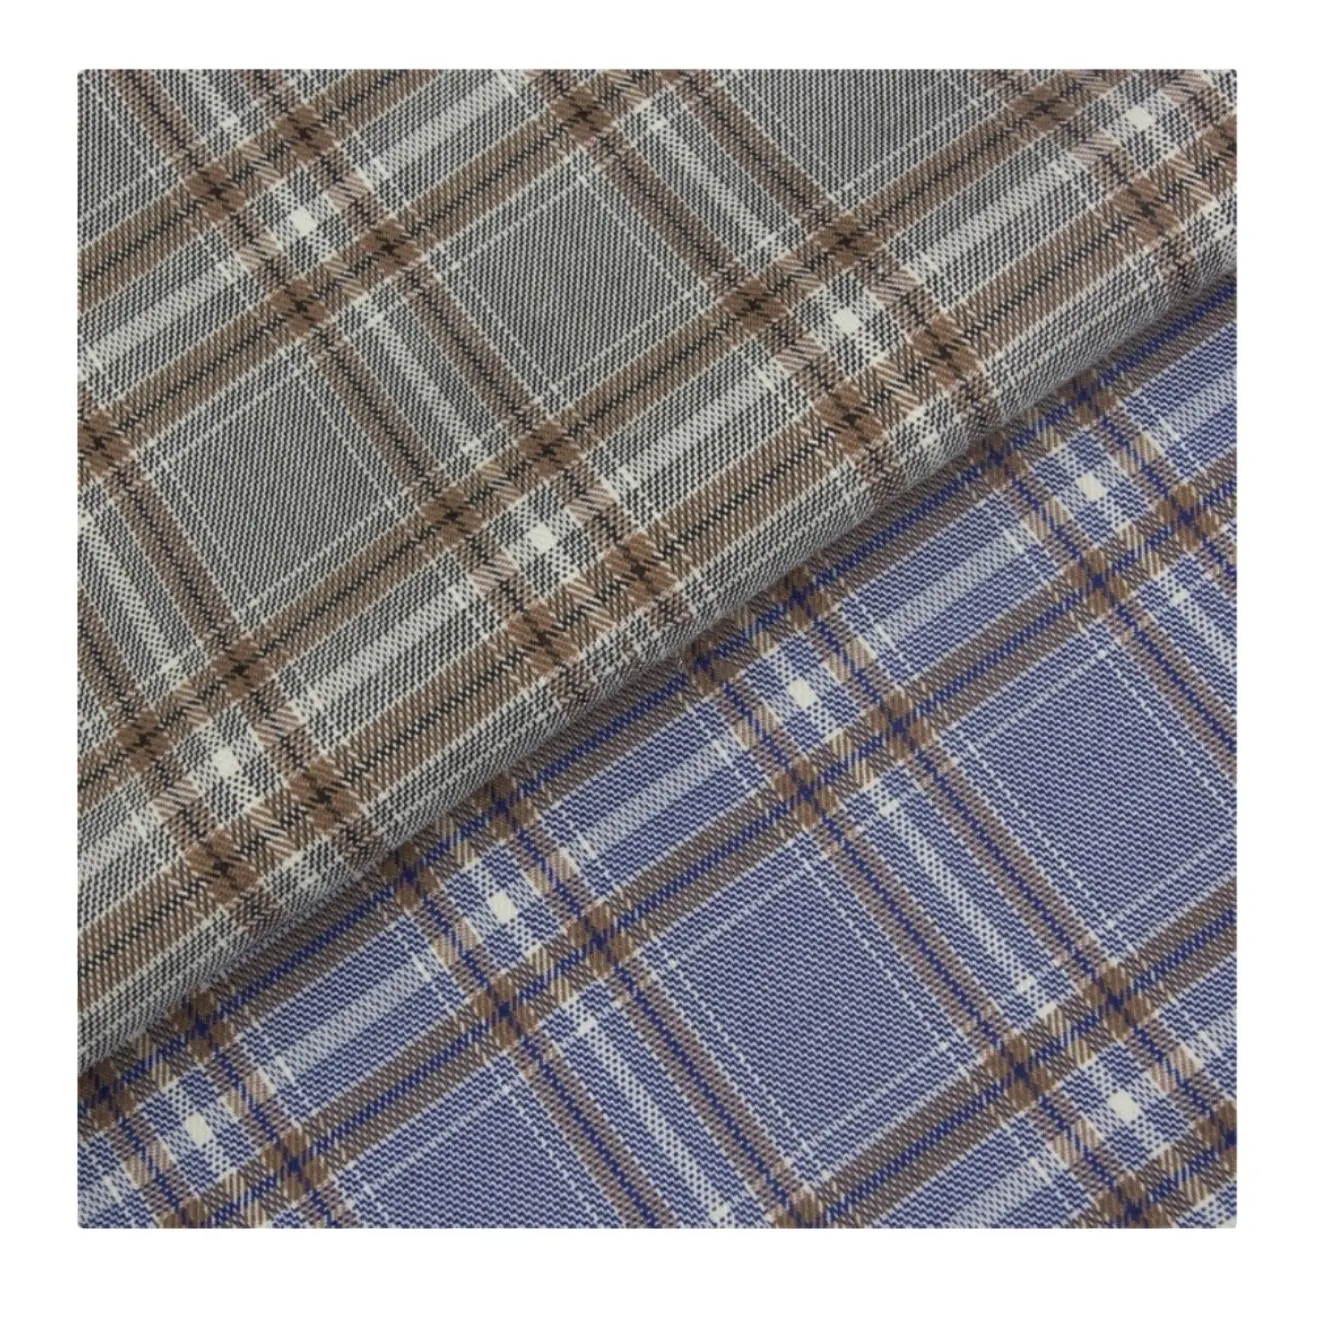 210T Polyester JK Clothing Fabric - Factory Direct Plaid Textile for Pleated Skirts Wholesale Distribution